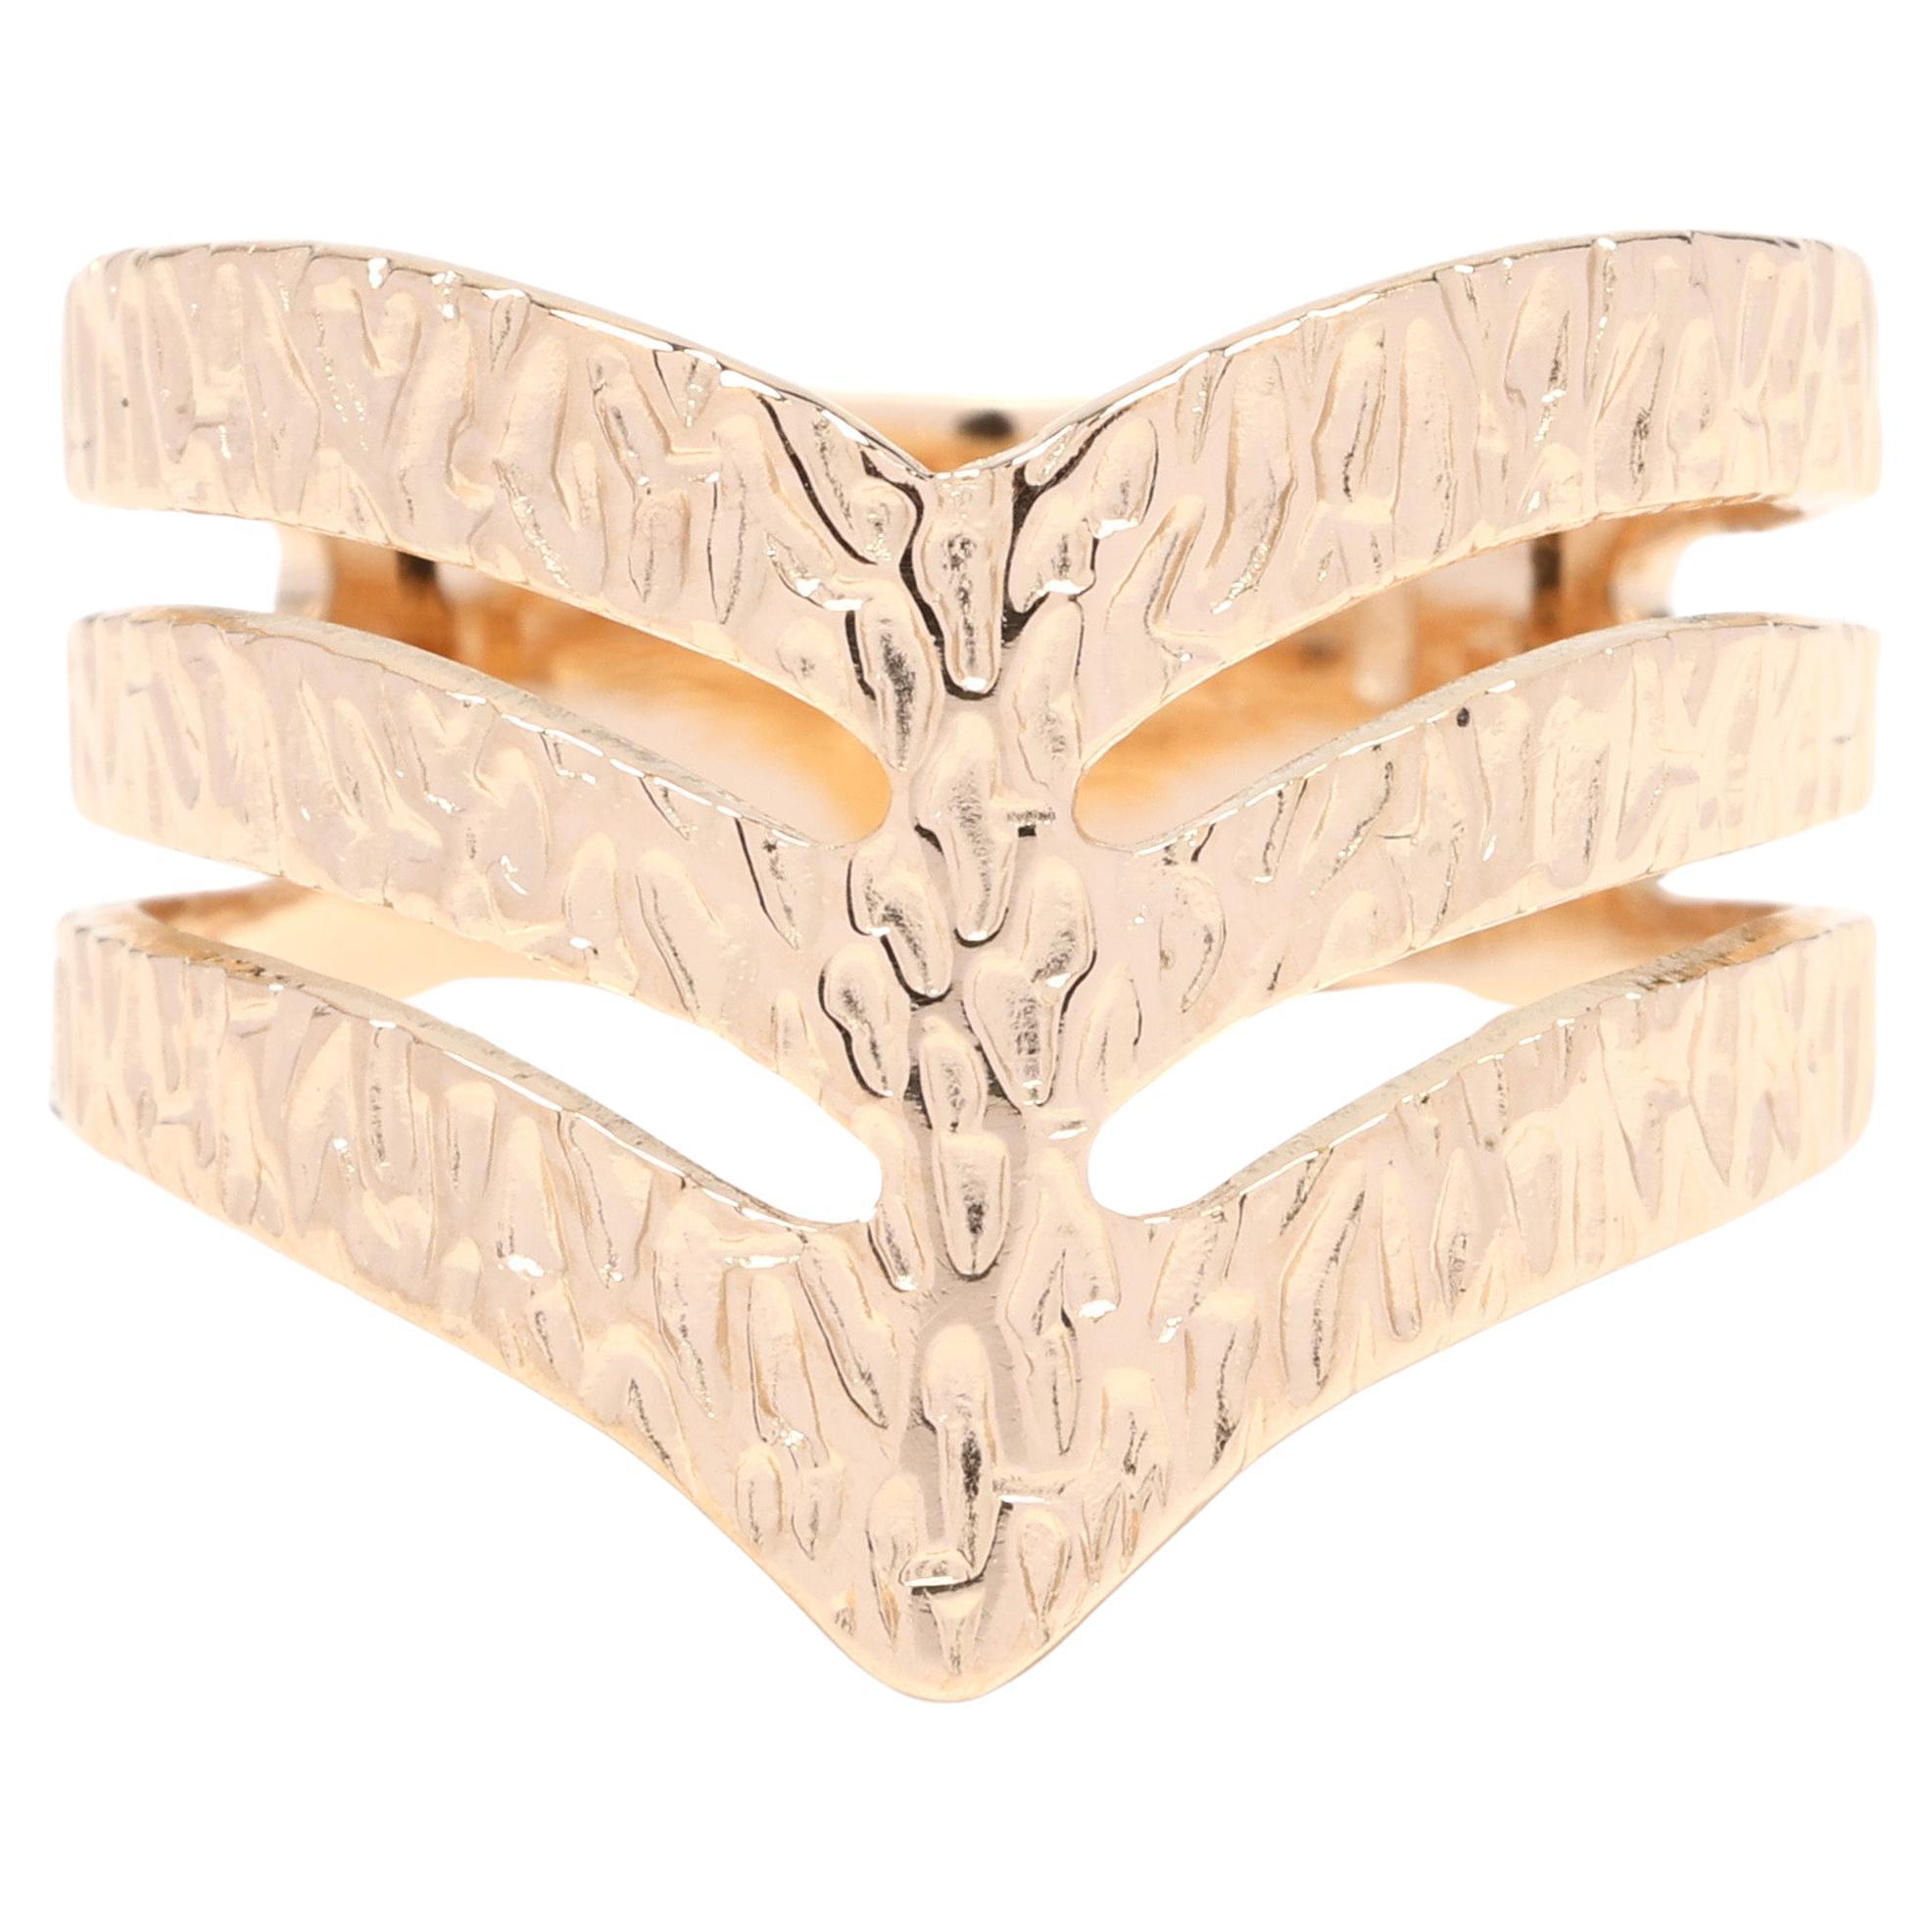 Thick Patterned Band Ring, 18k Yellow Gold, Ring Size 6.25, Textured Ring